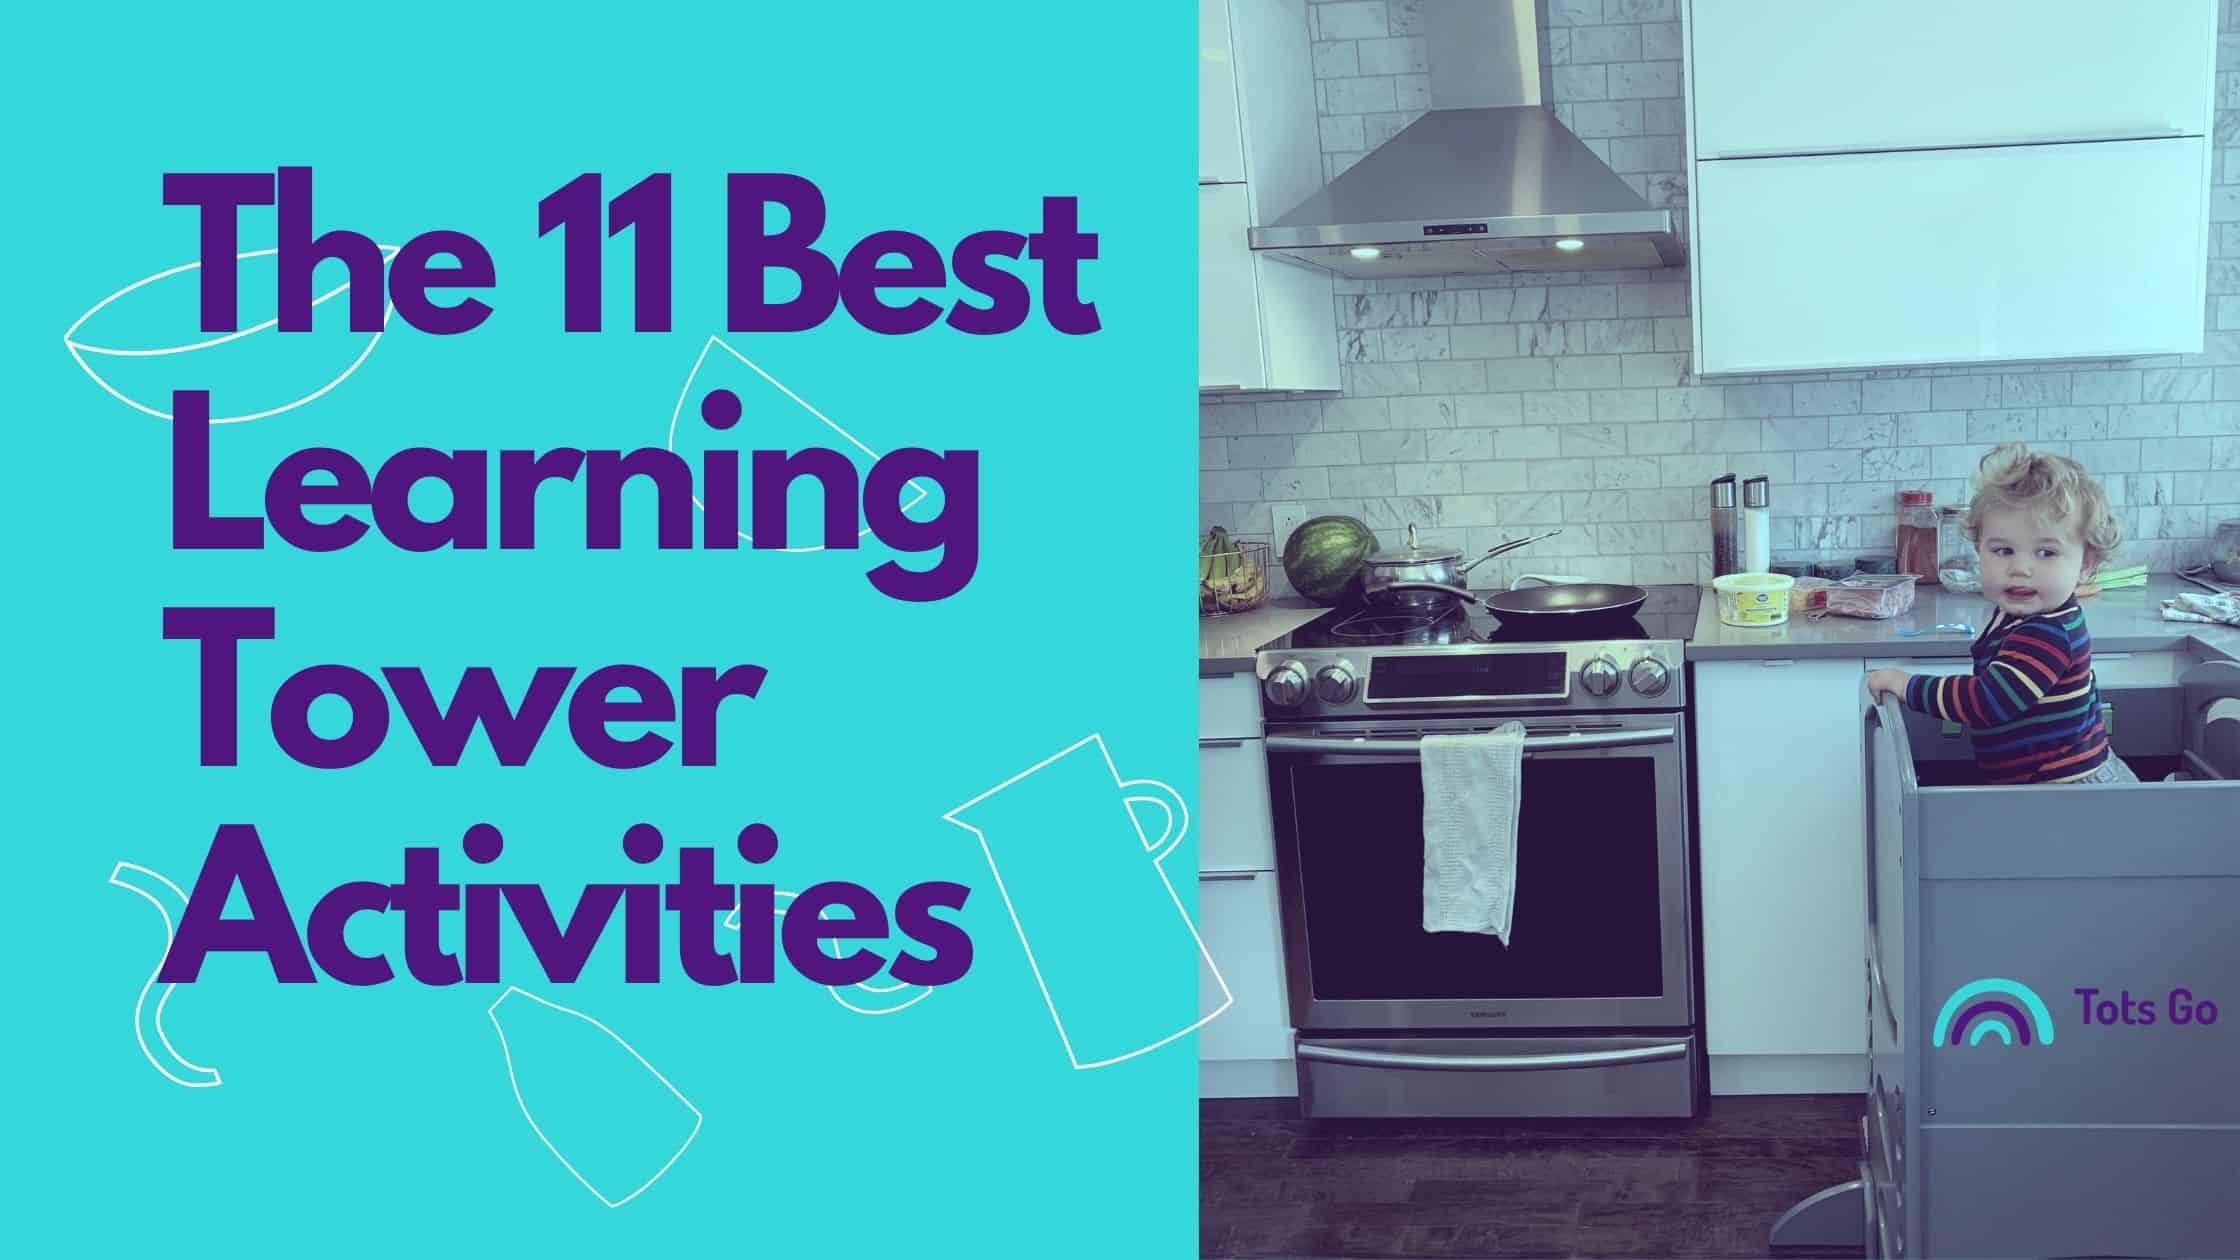 The best learning tower activities for toddlers